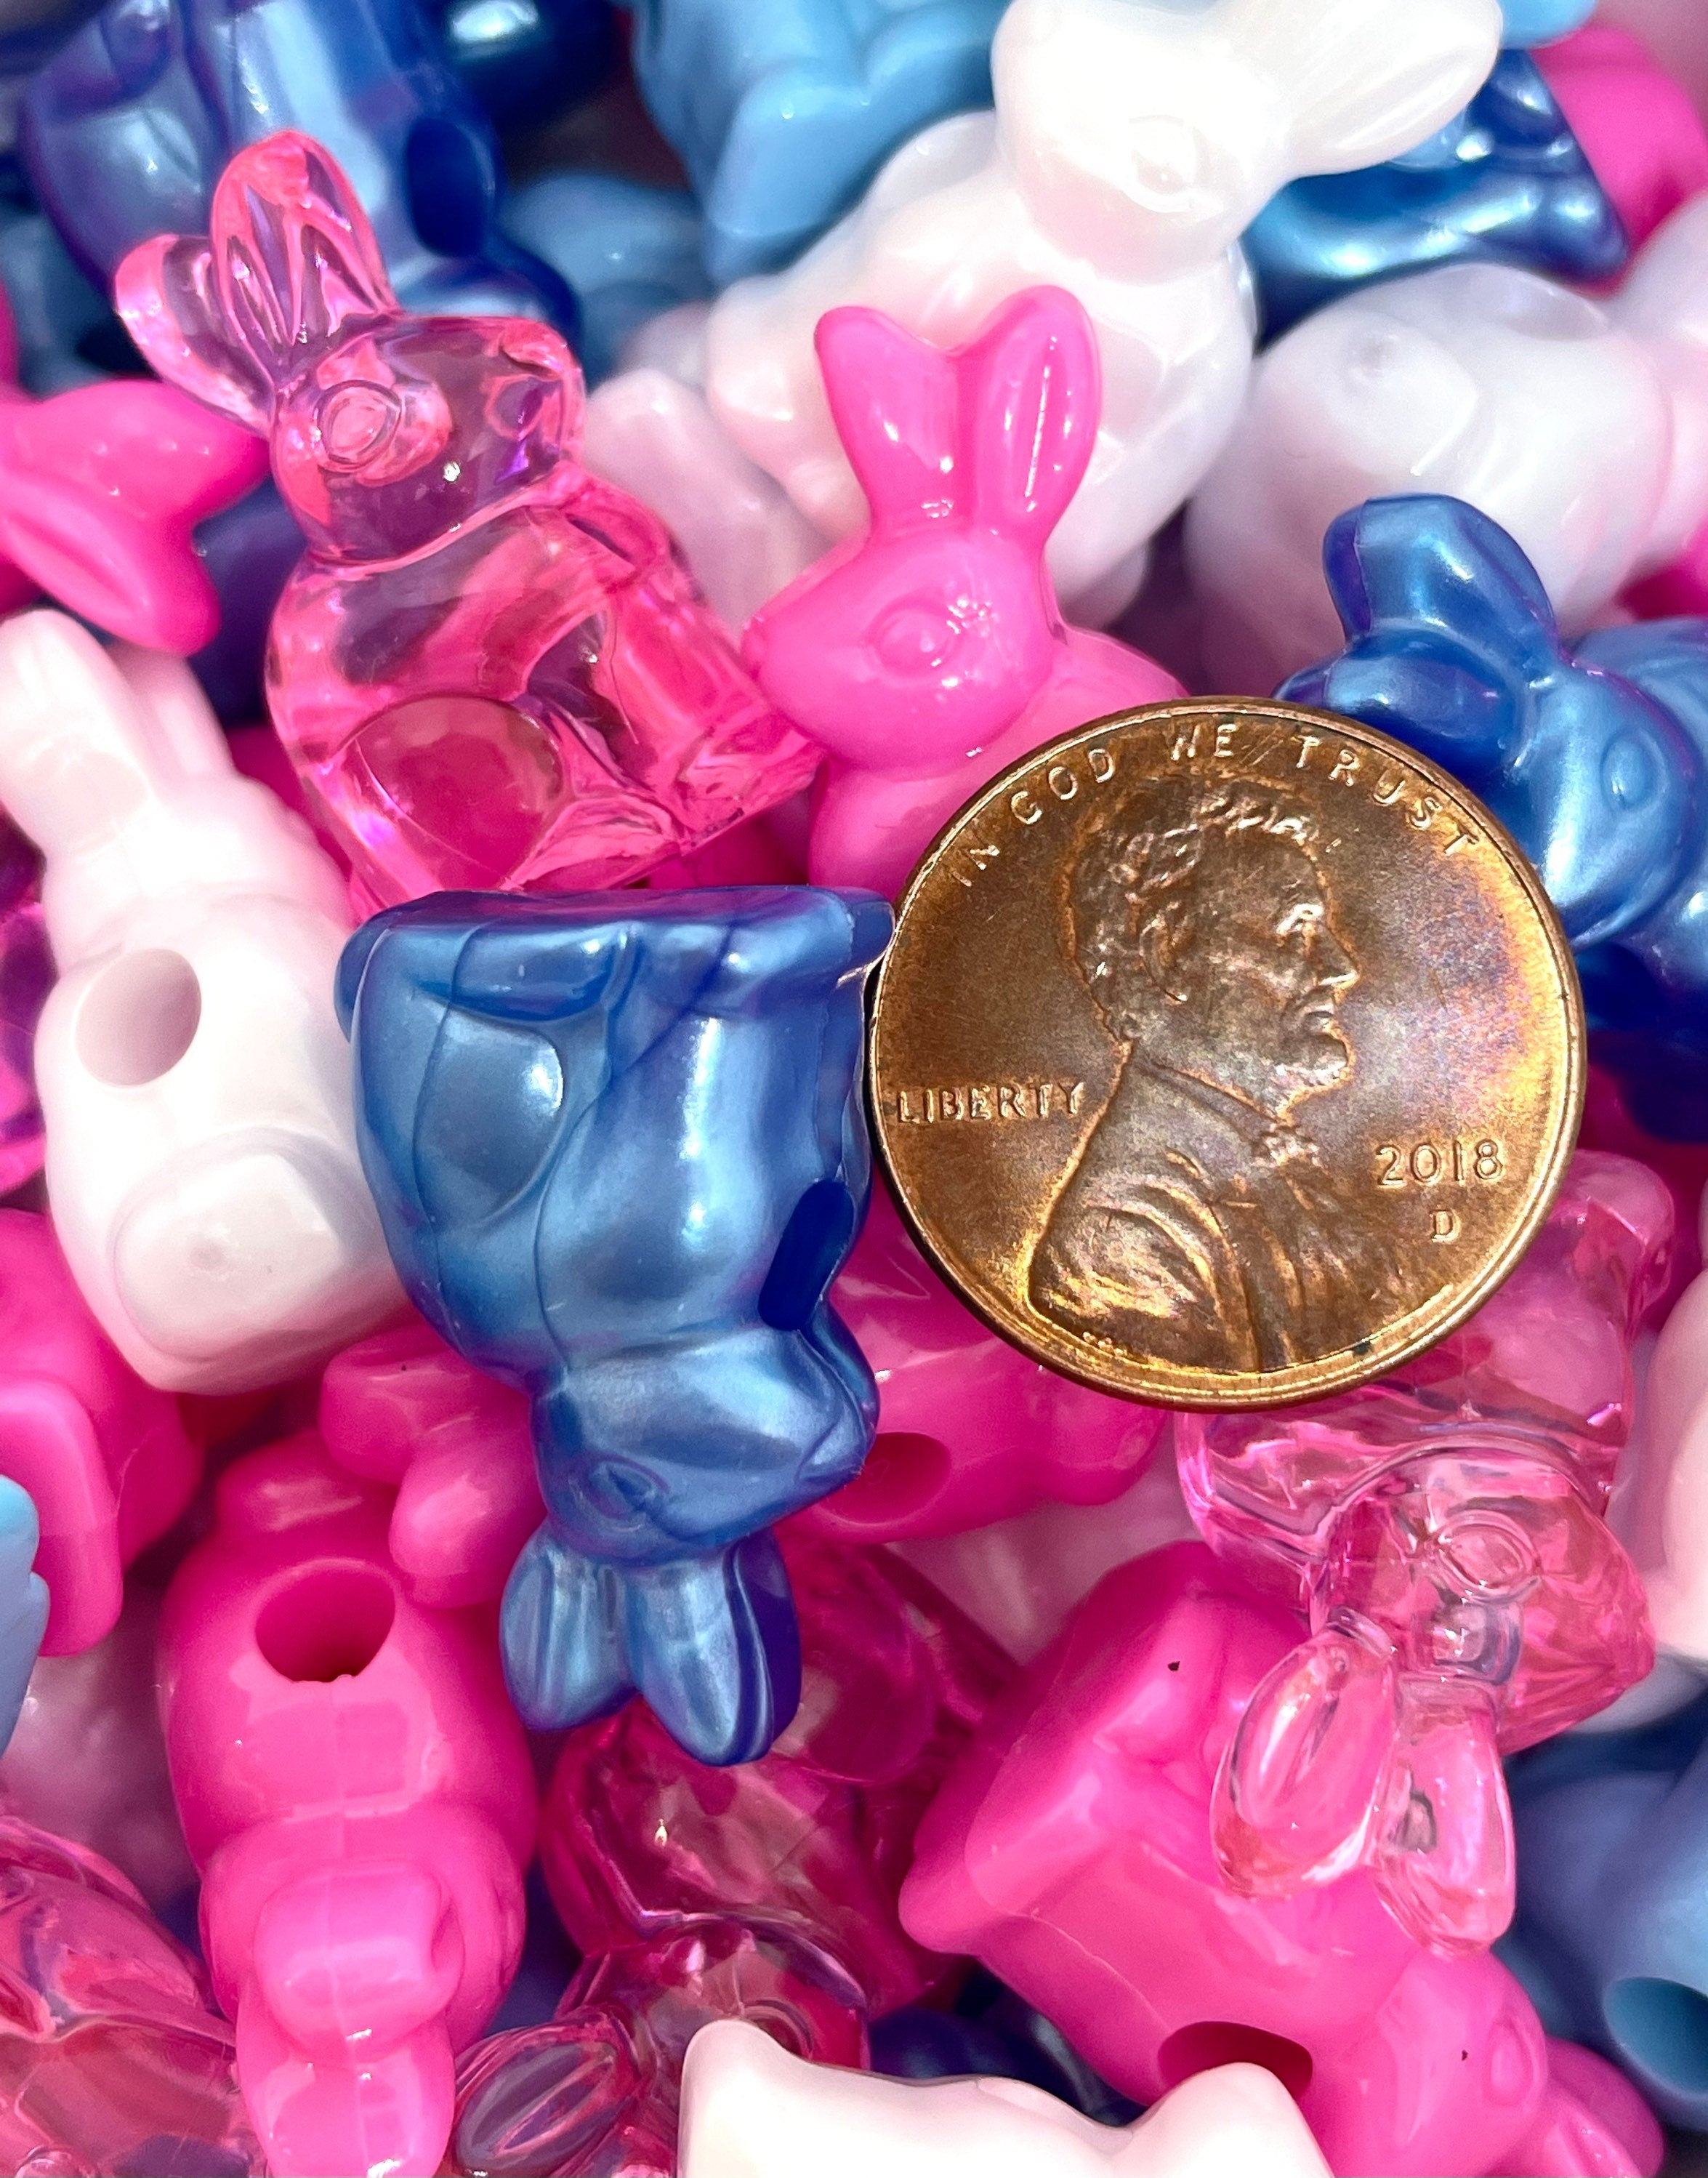 Baby Bunny Bead Variety for Jewelry Making, Easter Beads for Garland, Animal Beads for Kids, Rabbit Beads